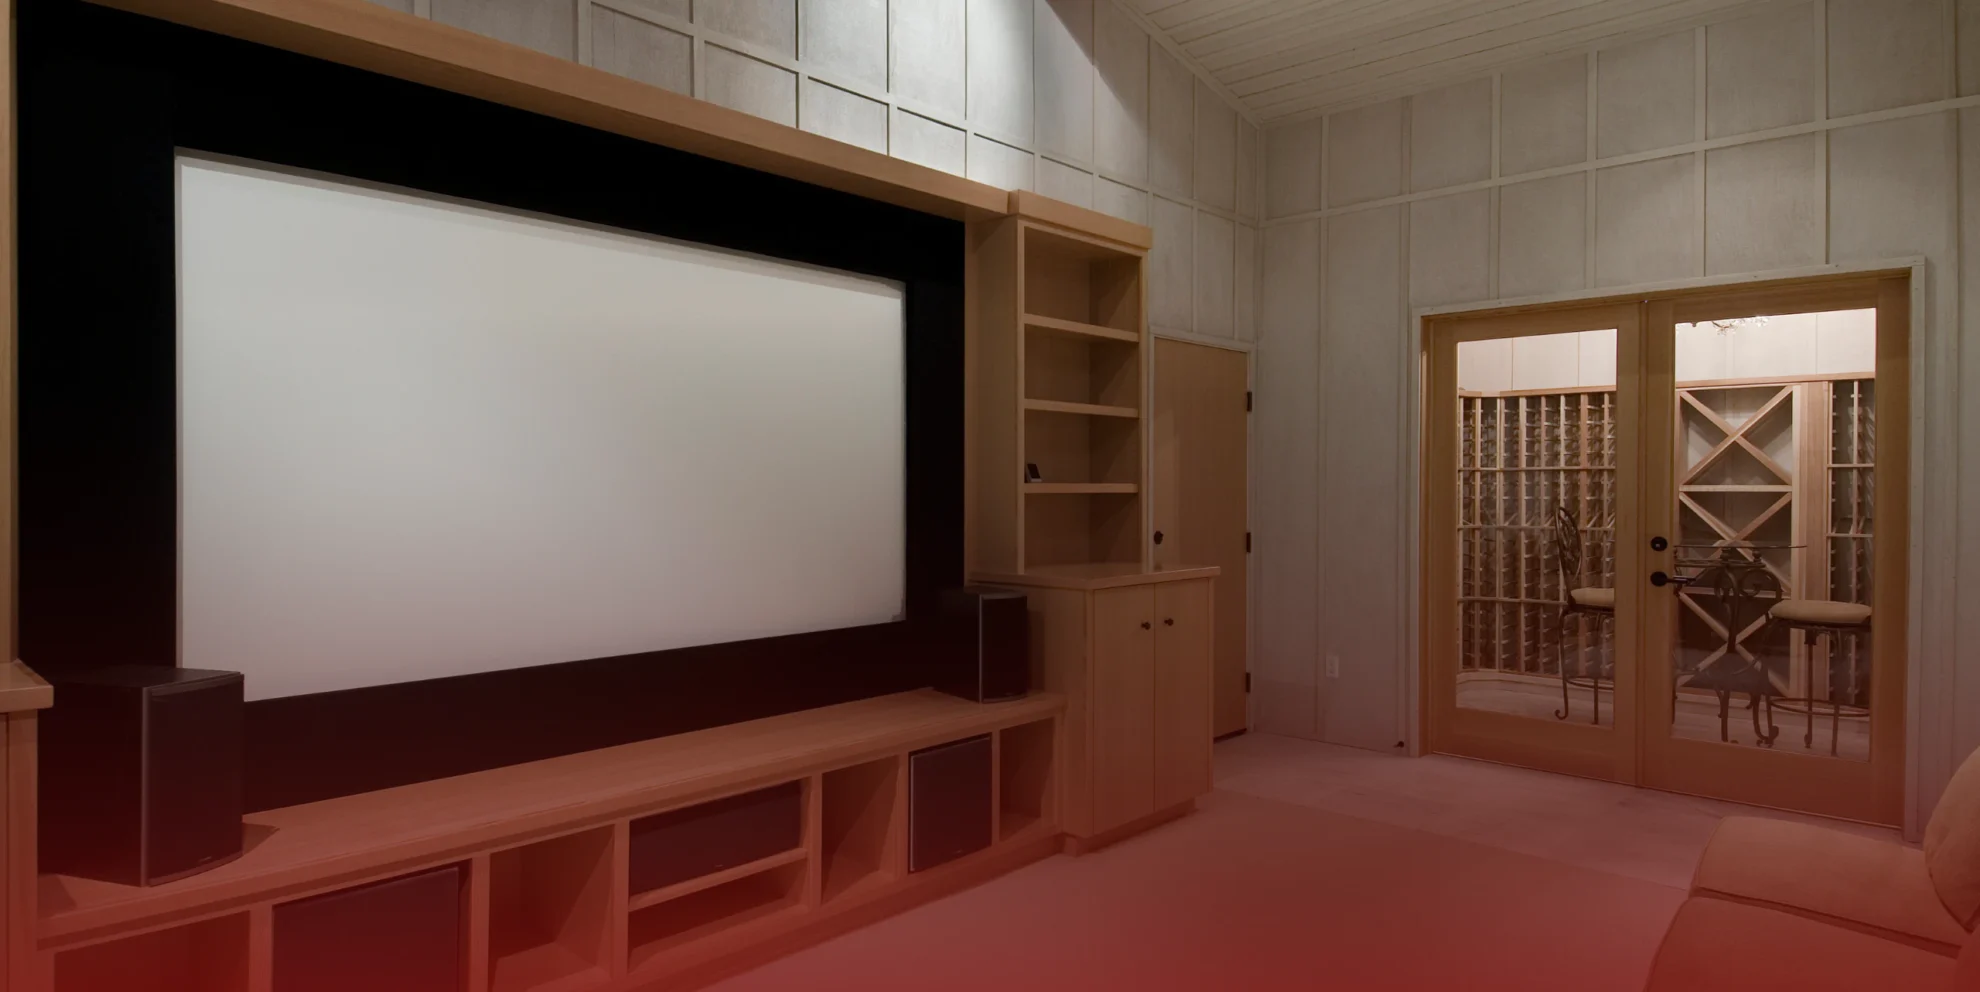 home theater with projector screen